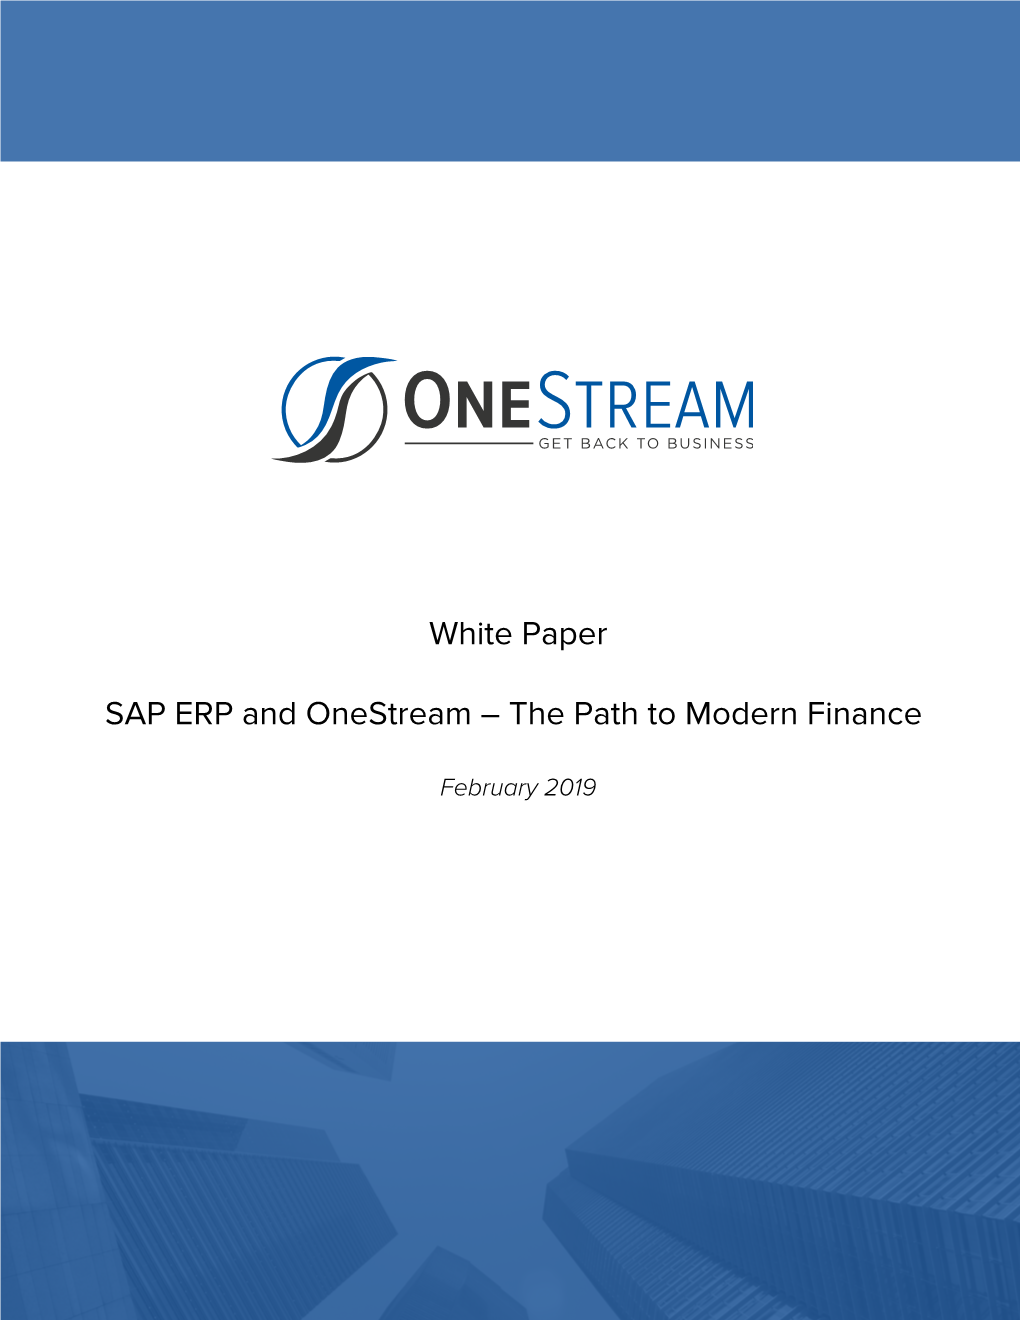 SAP ERP and Onestream – the Path to Modern Finance